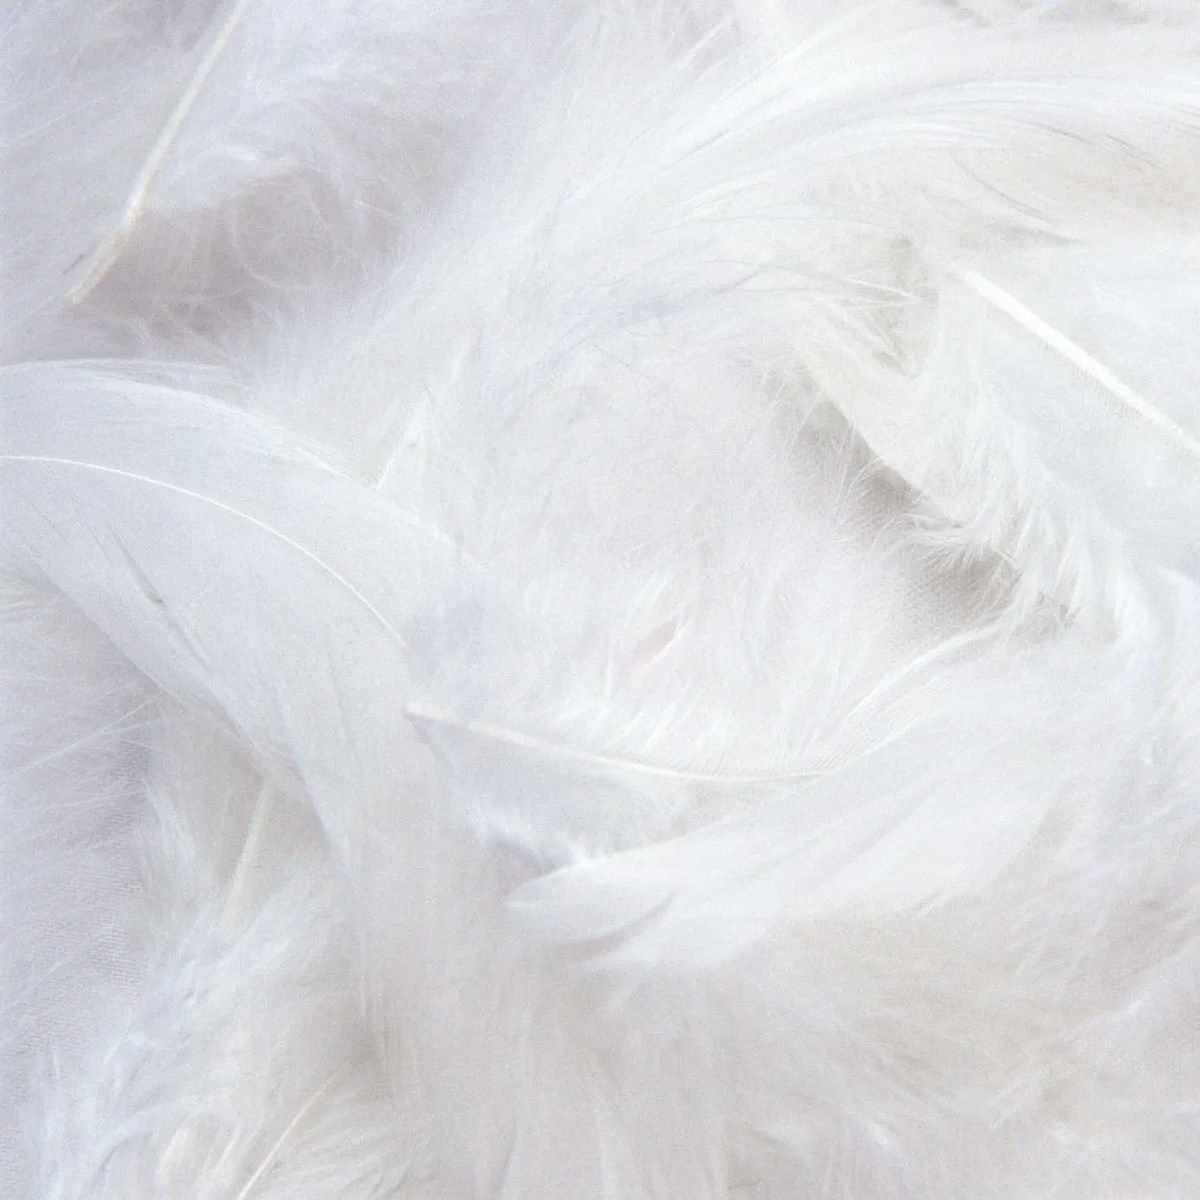 Close up of feather filling sofa stuffing